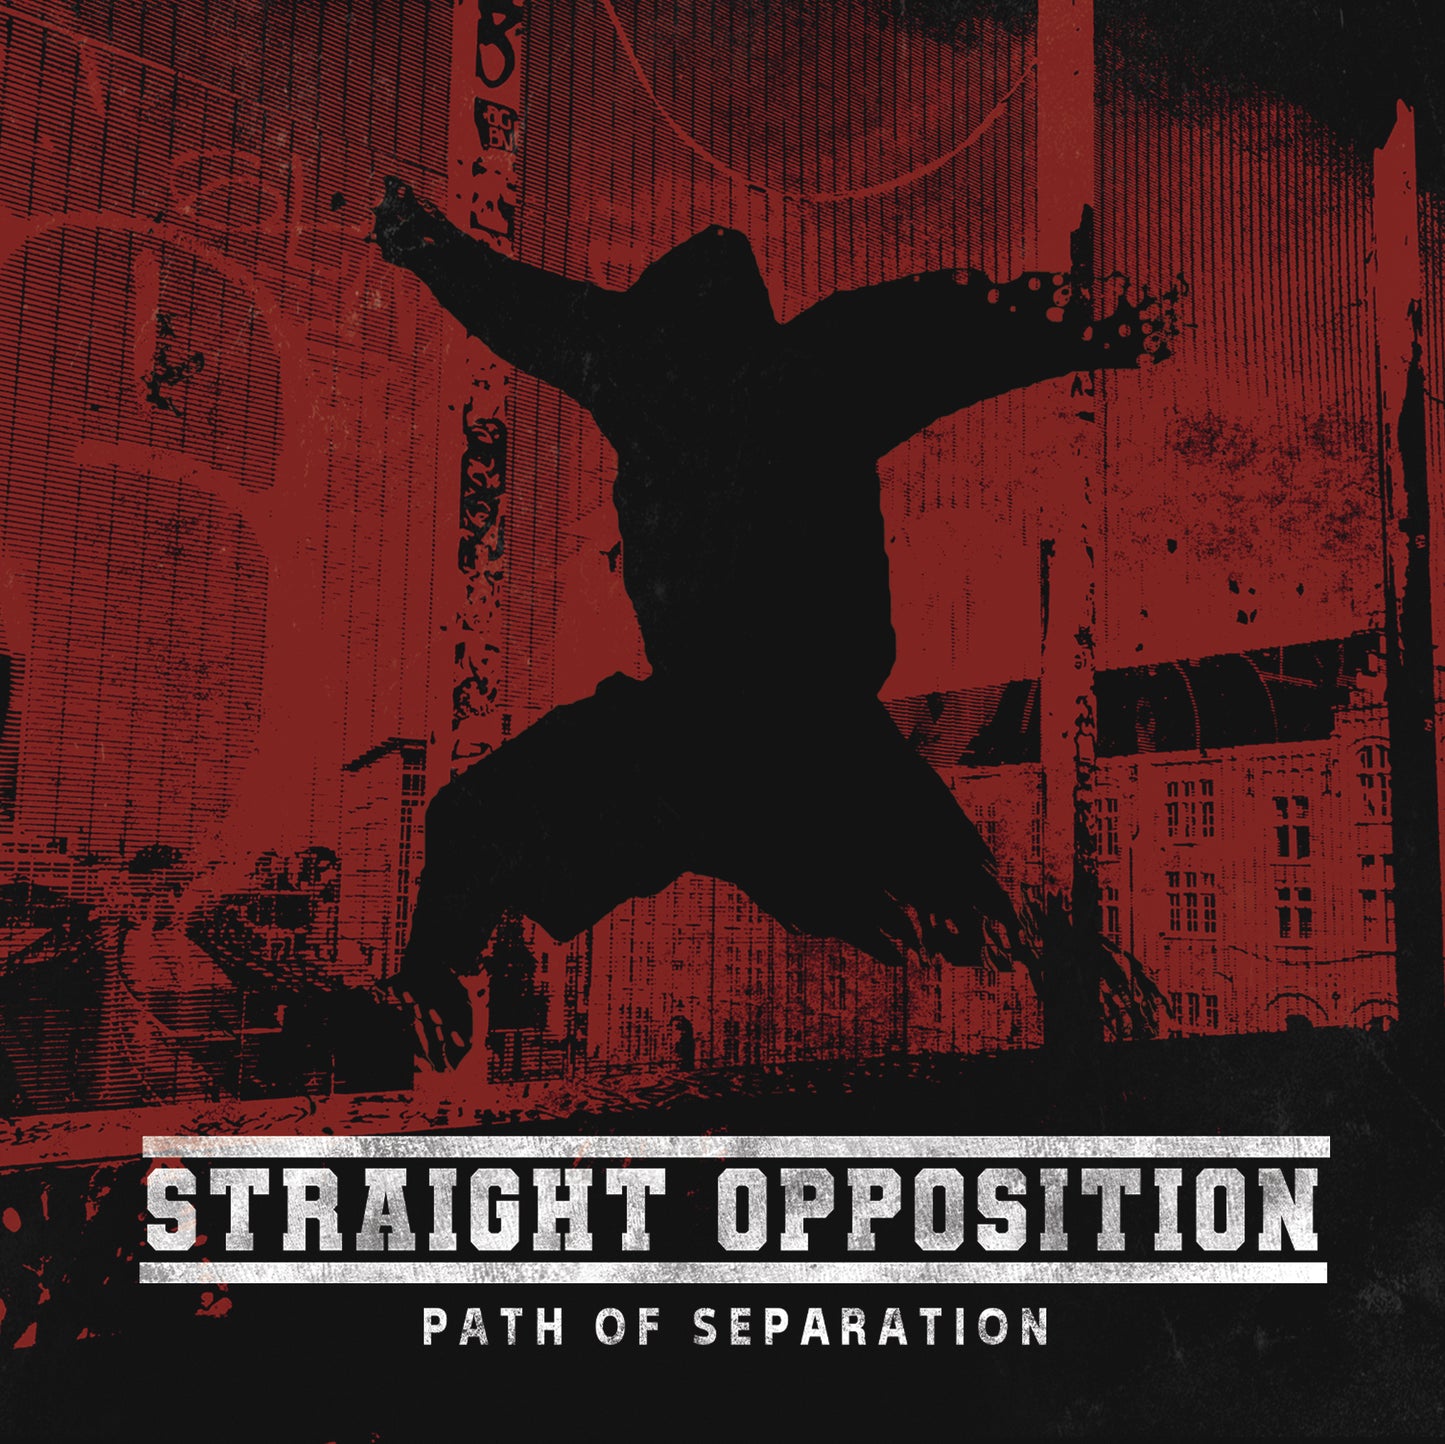 Straight Opposition "Path of Separation" CD